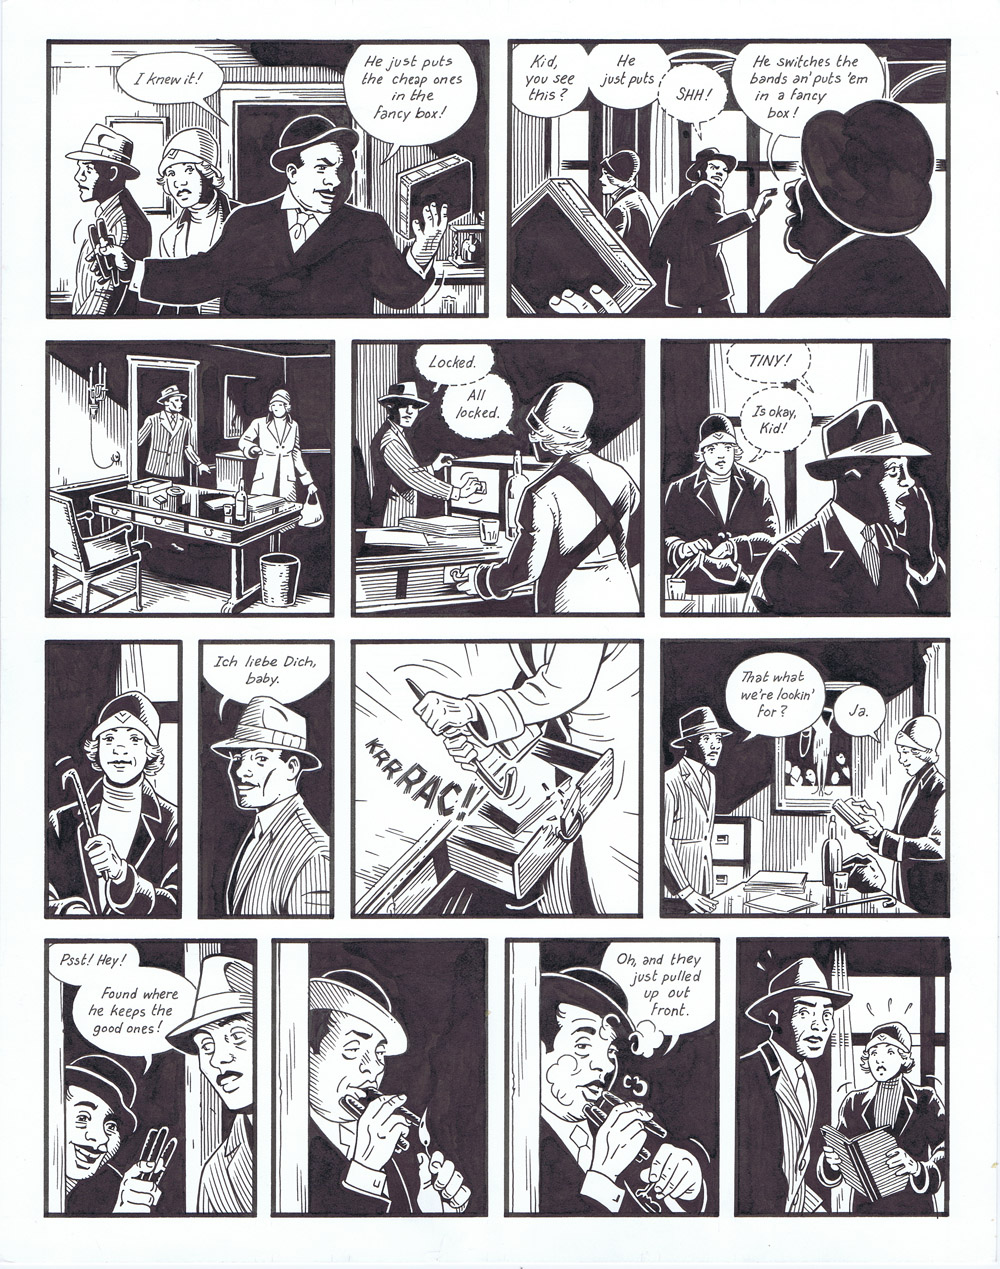 Berlin - page 391 Book Two: City of Smoke - page 197